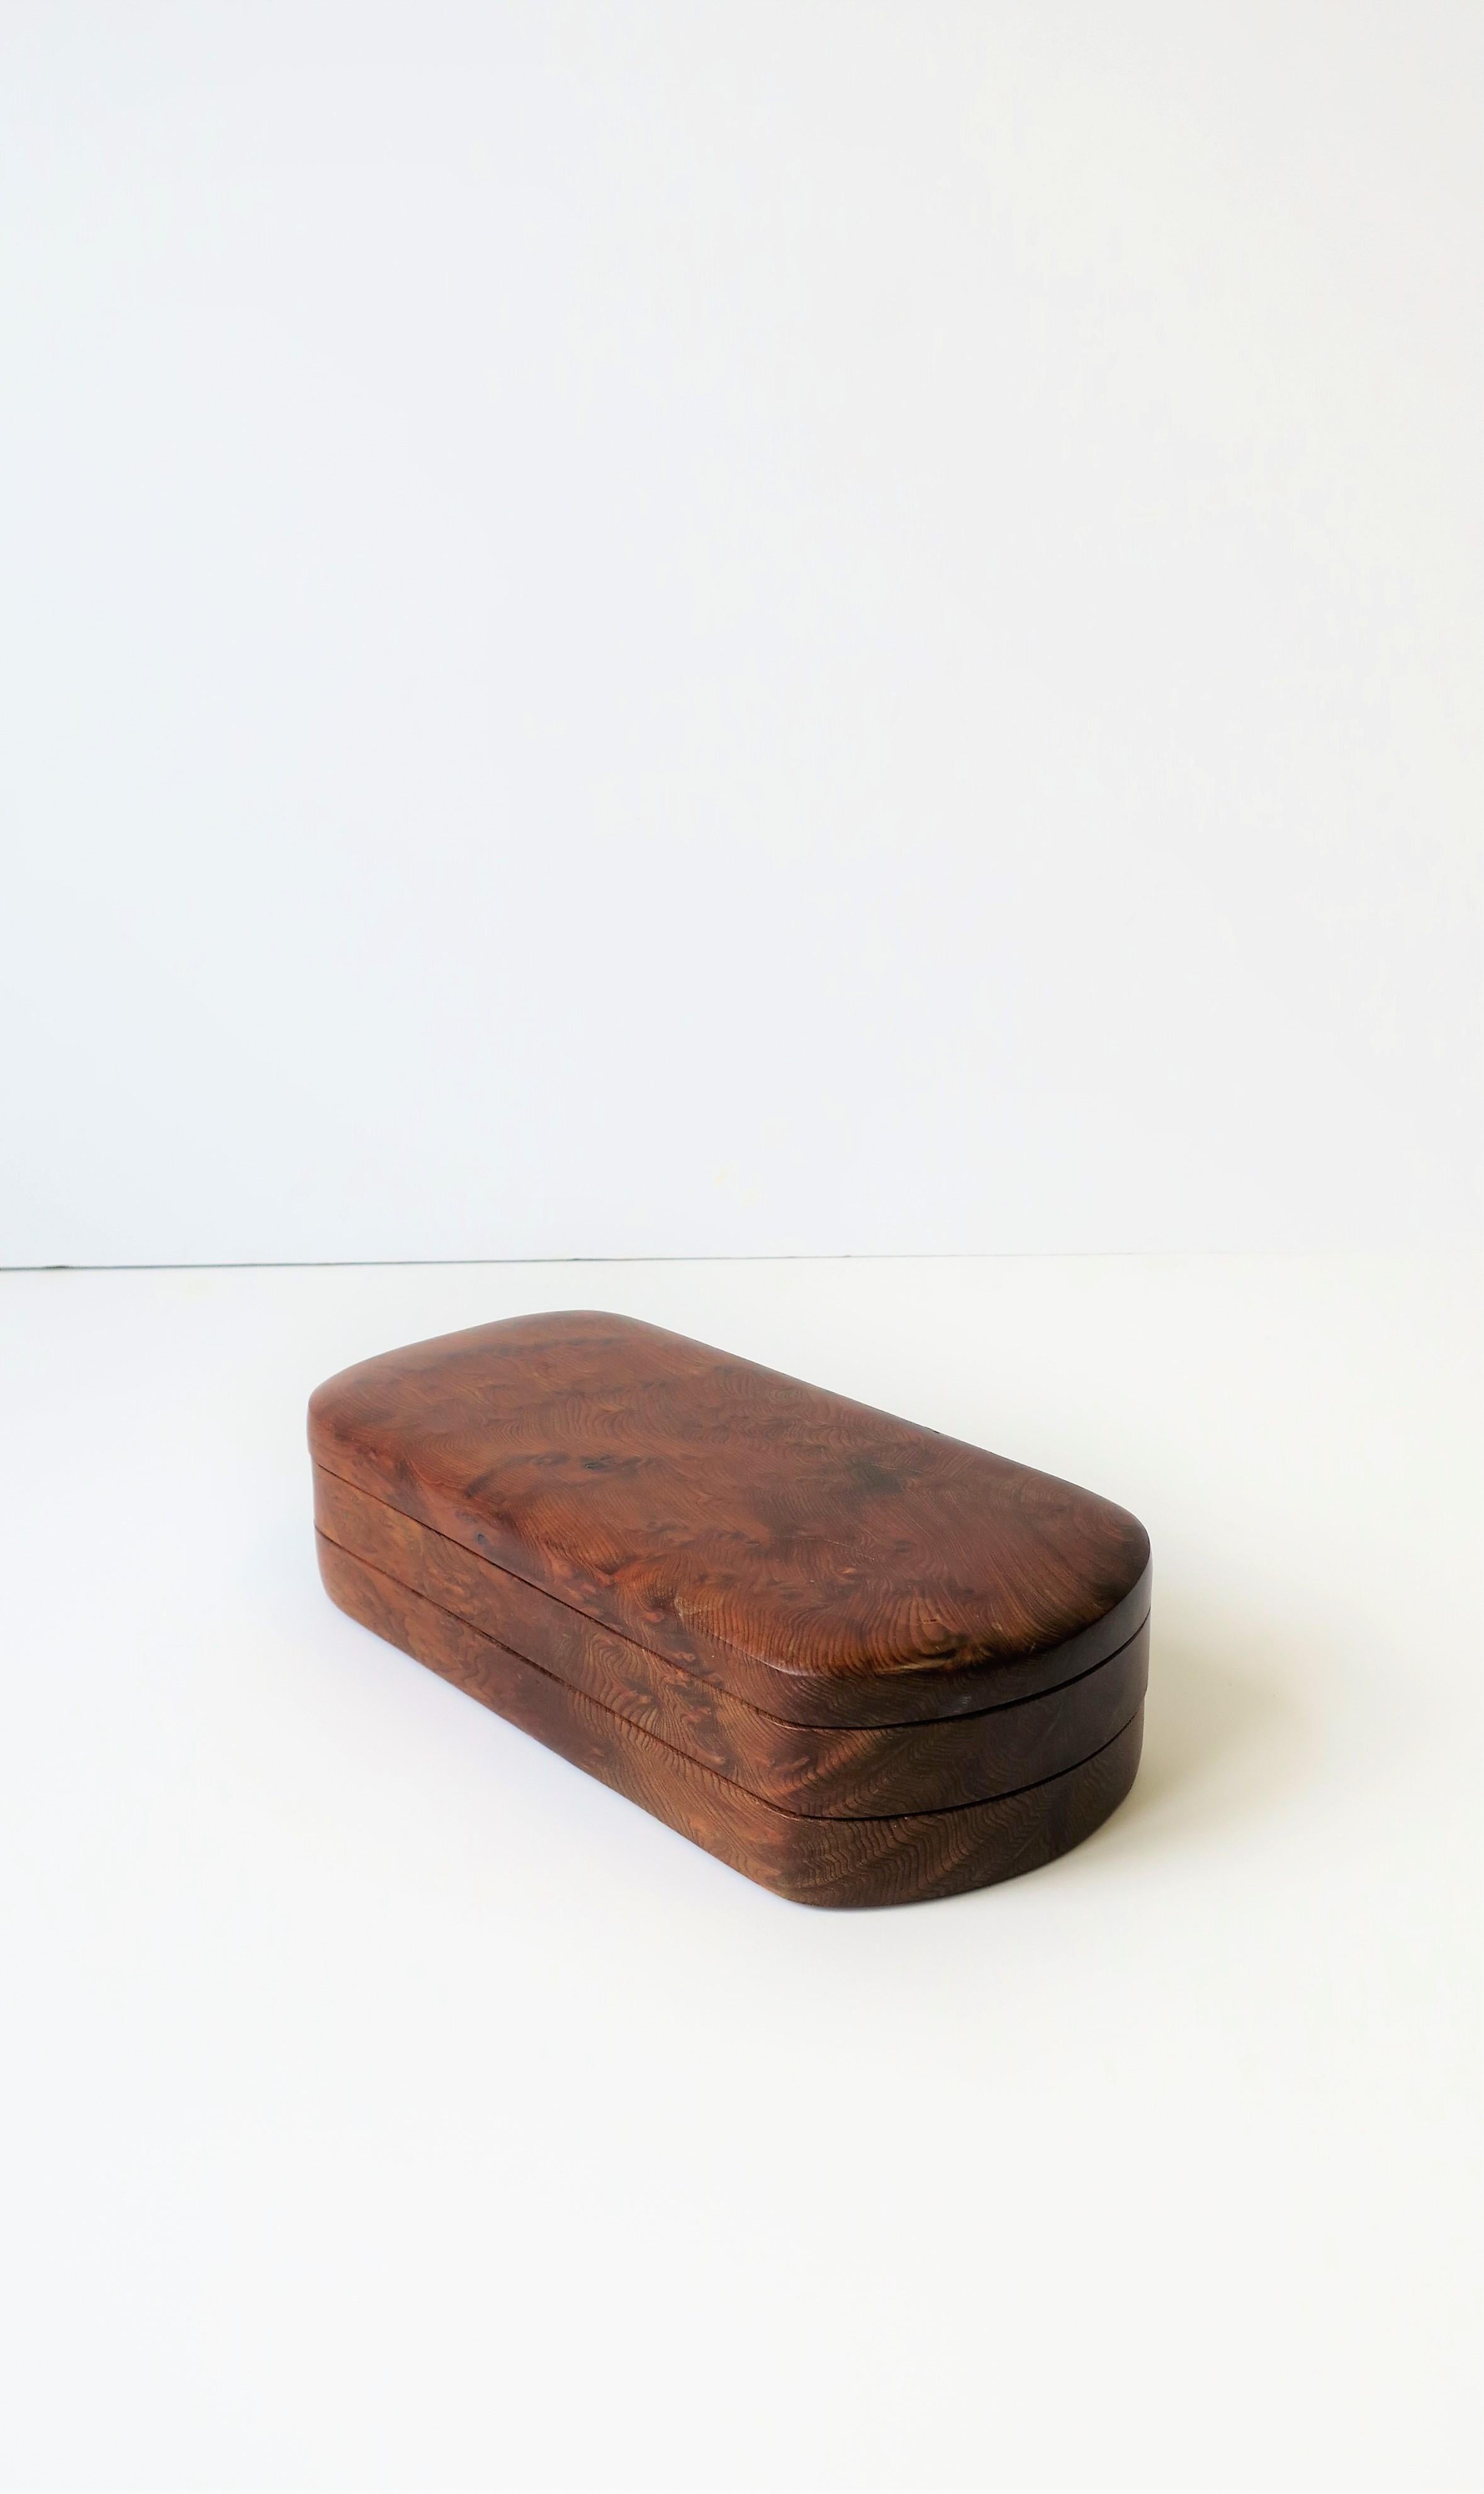 A beautiful vintage minimalist or organic modern rich burl wood vanity box or desk vessel with two trays for storage, circa late 20th century. A great box for medium to small items such as cufflinks, earrings, rings, bracelets, necklaces, etc., as